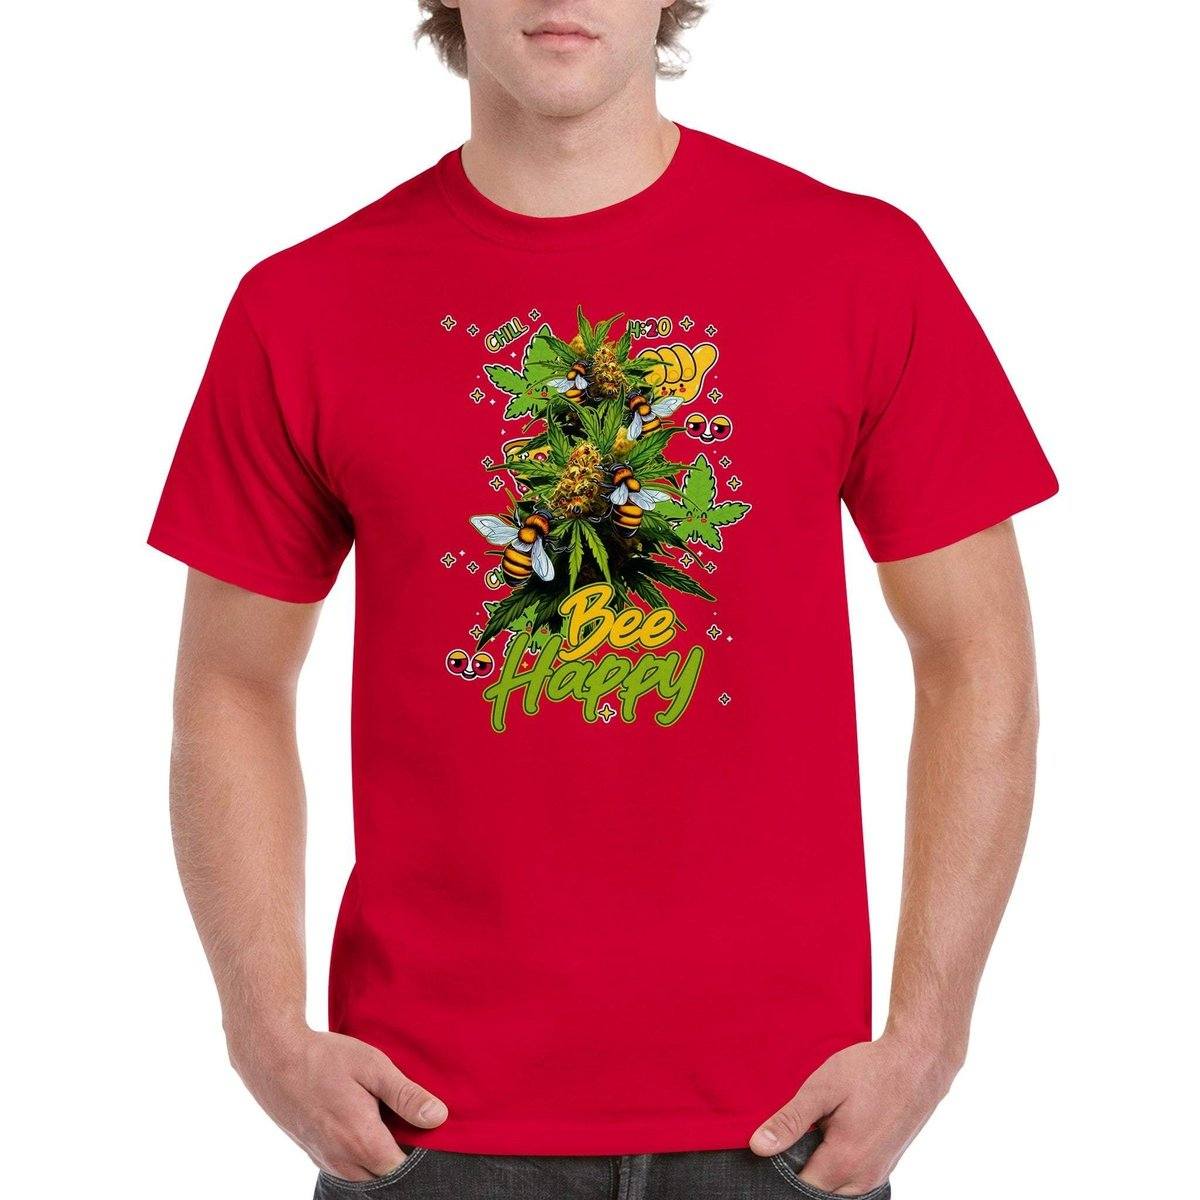 Bee Happy Weed T-Shirt - Funny Bees Happy Weed Stoner 420 Tshirt - Unisex Crewneck T-shirt Adults T-Shirts Unisex Red / S BC Australia